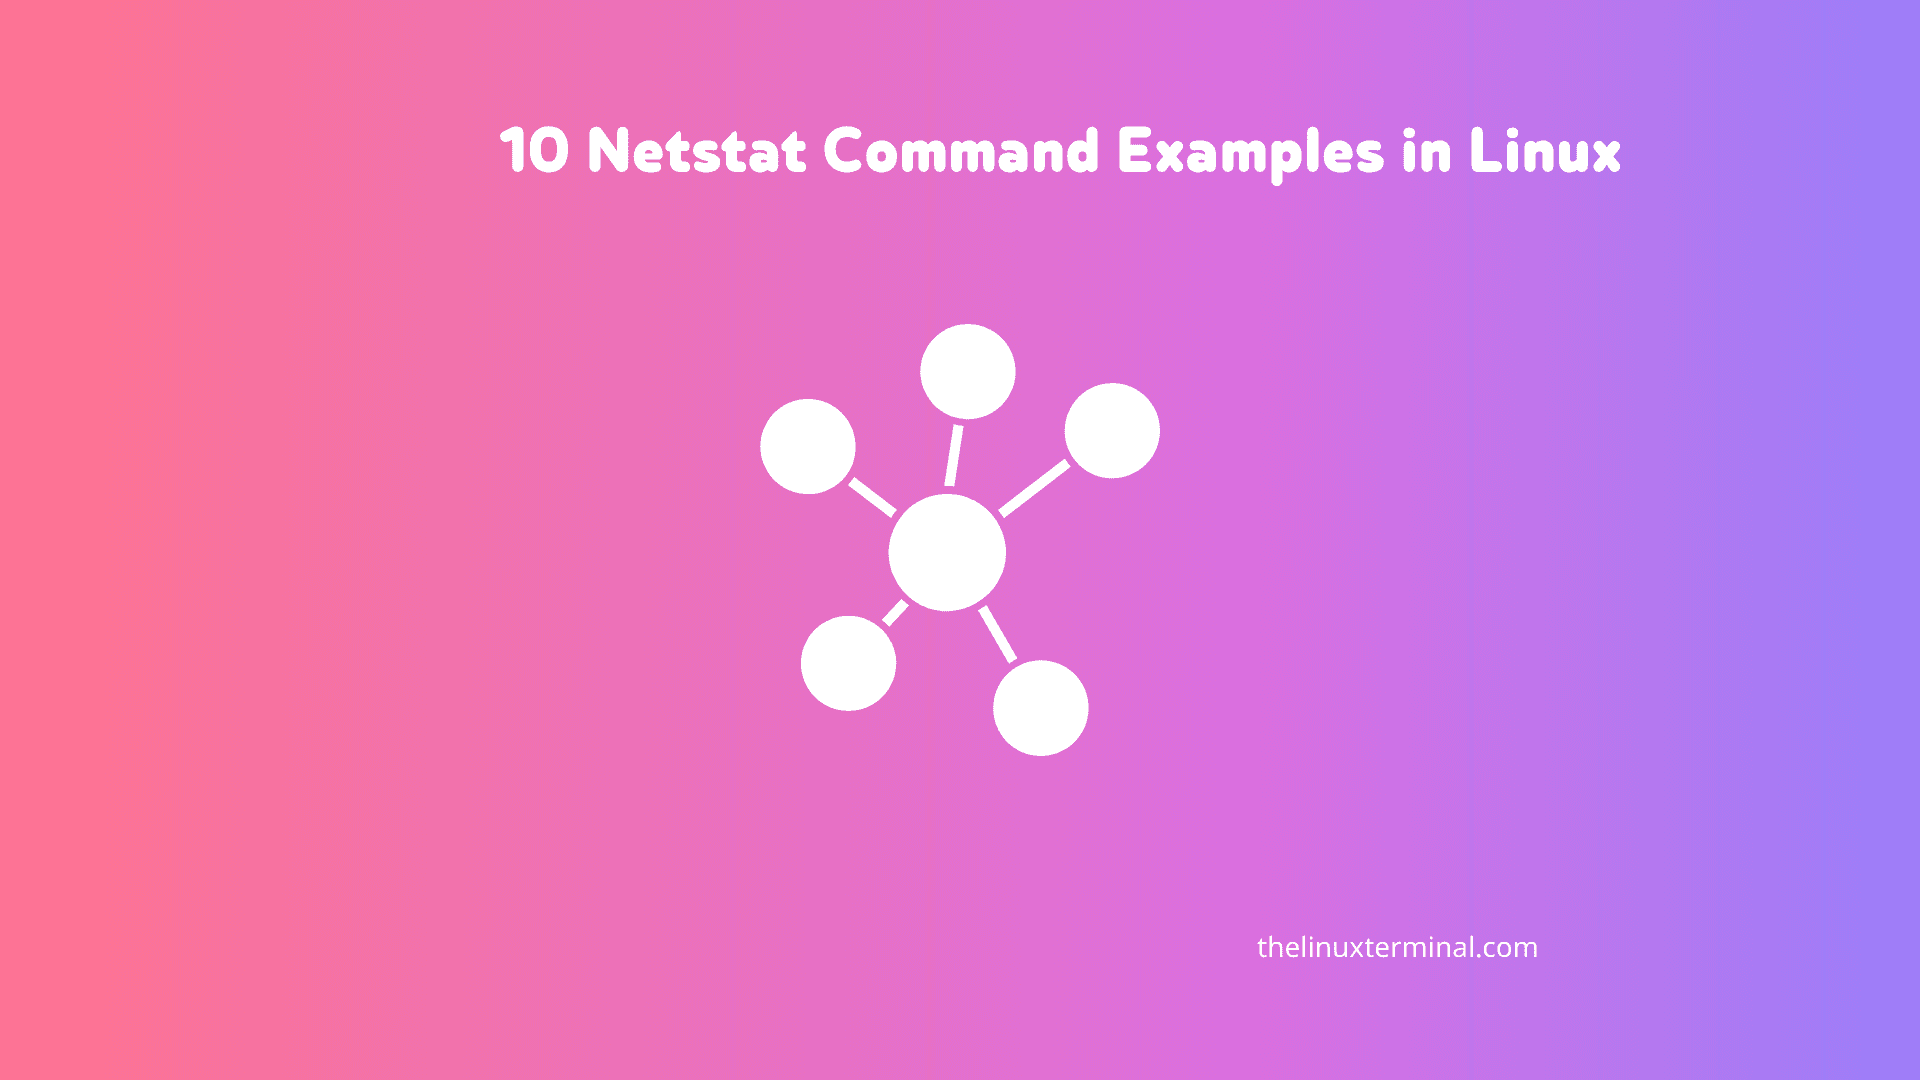 10 Netstat Command Examples in Linux